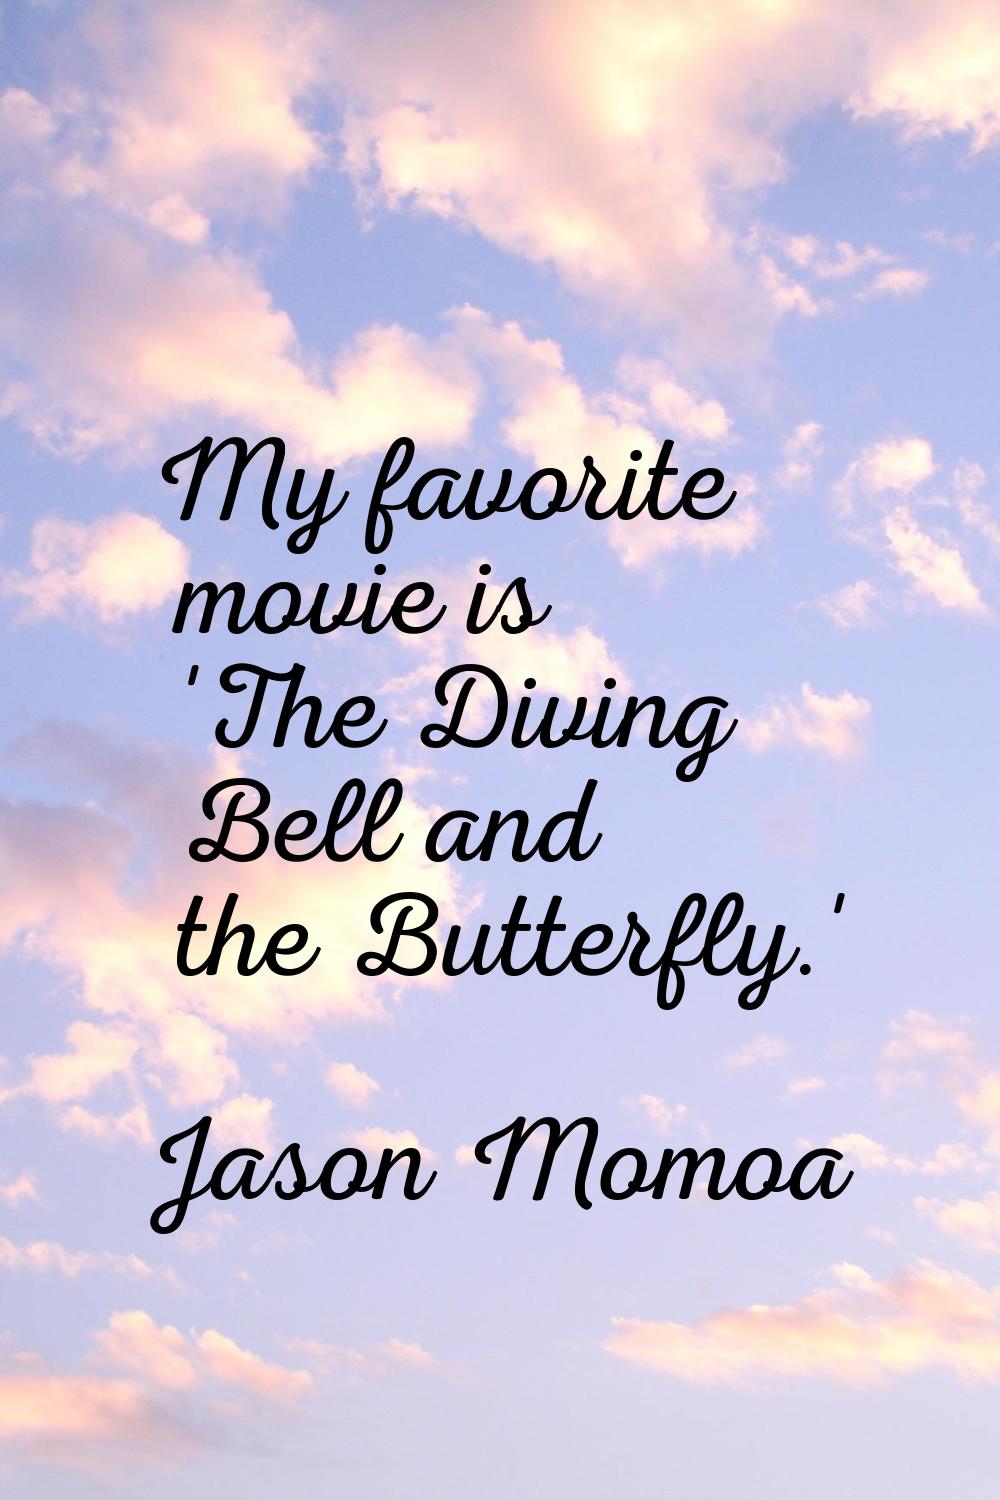 My favorite movie is 'The Diving Bell and the Butterfly.'